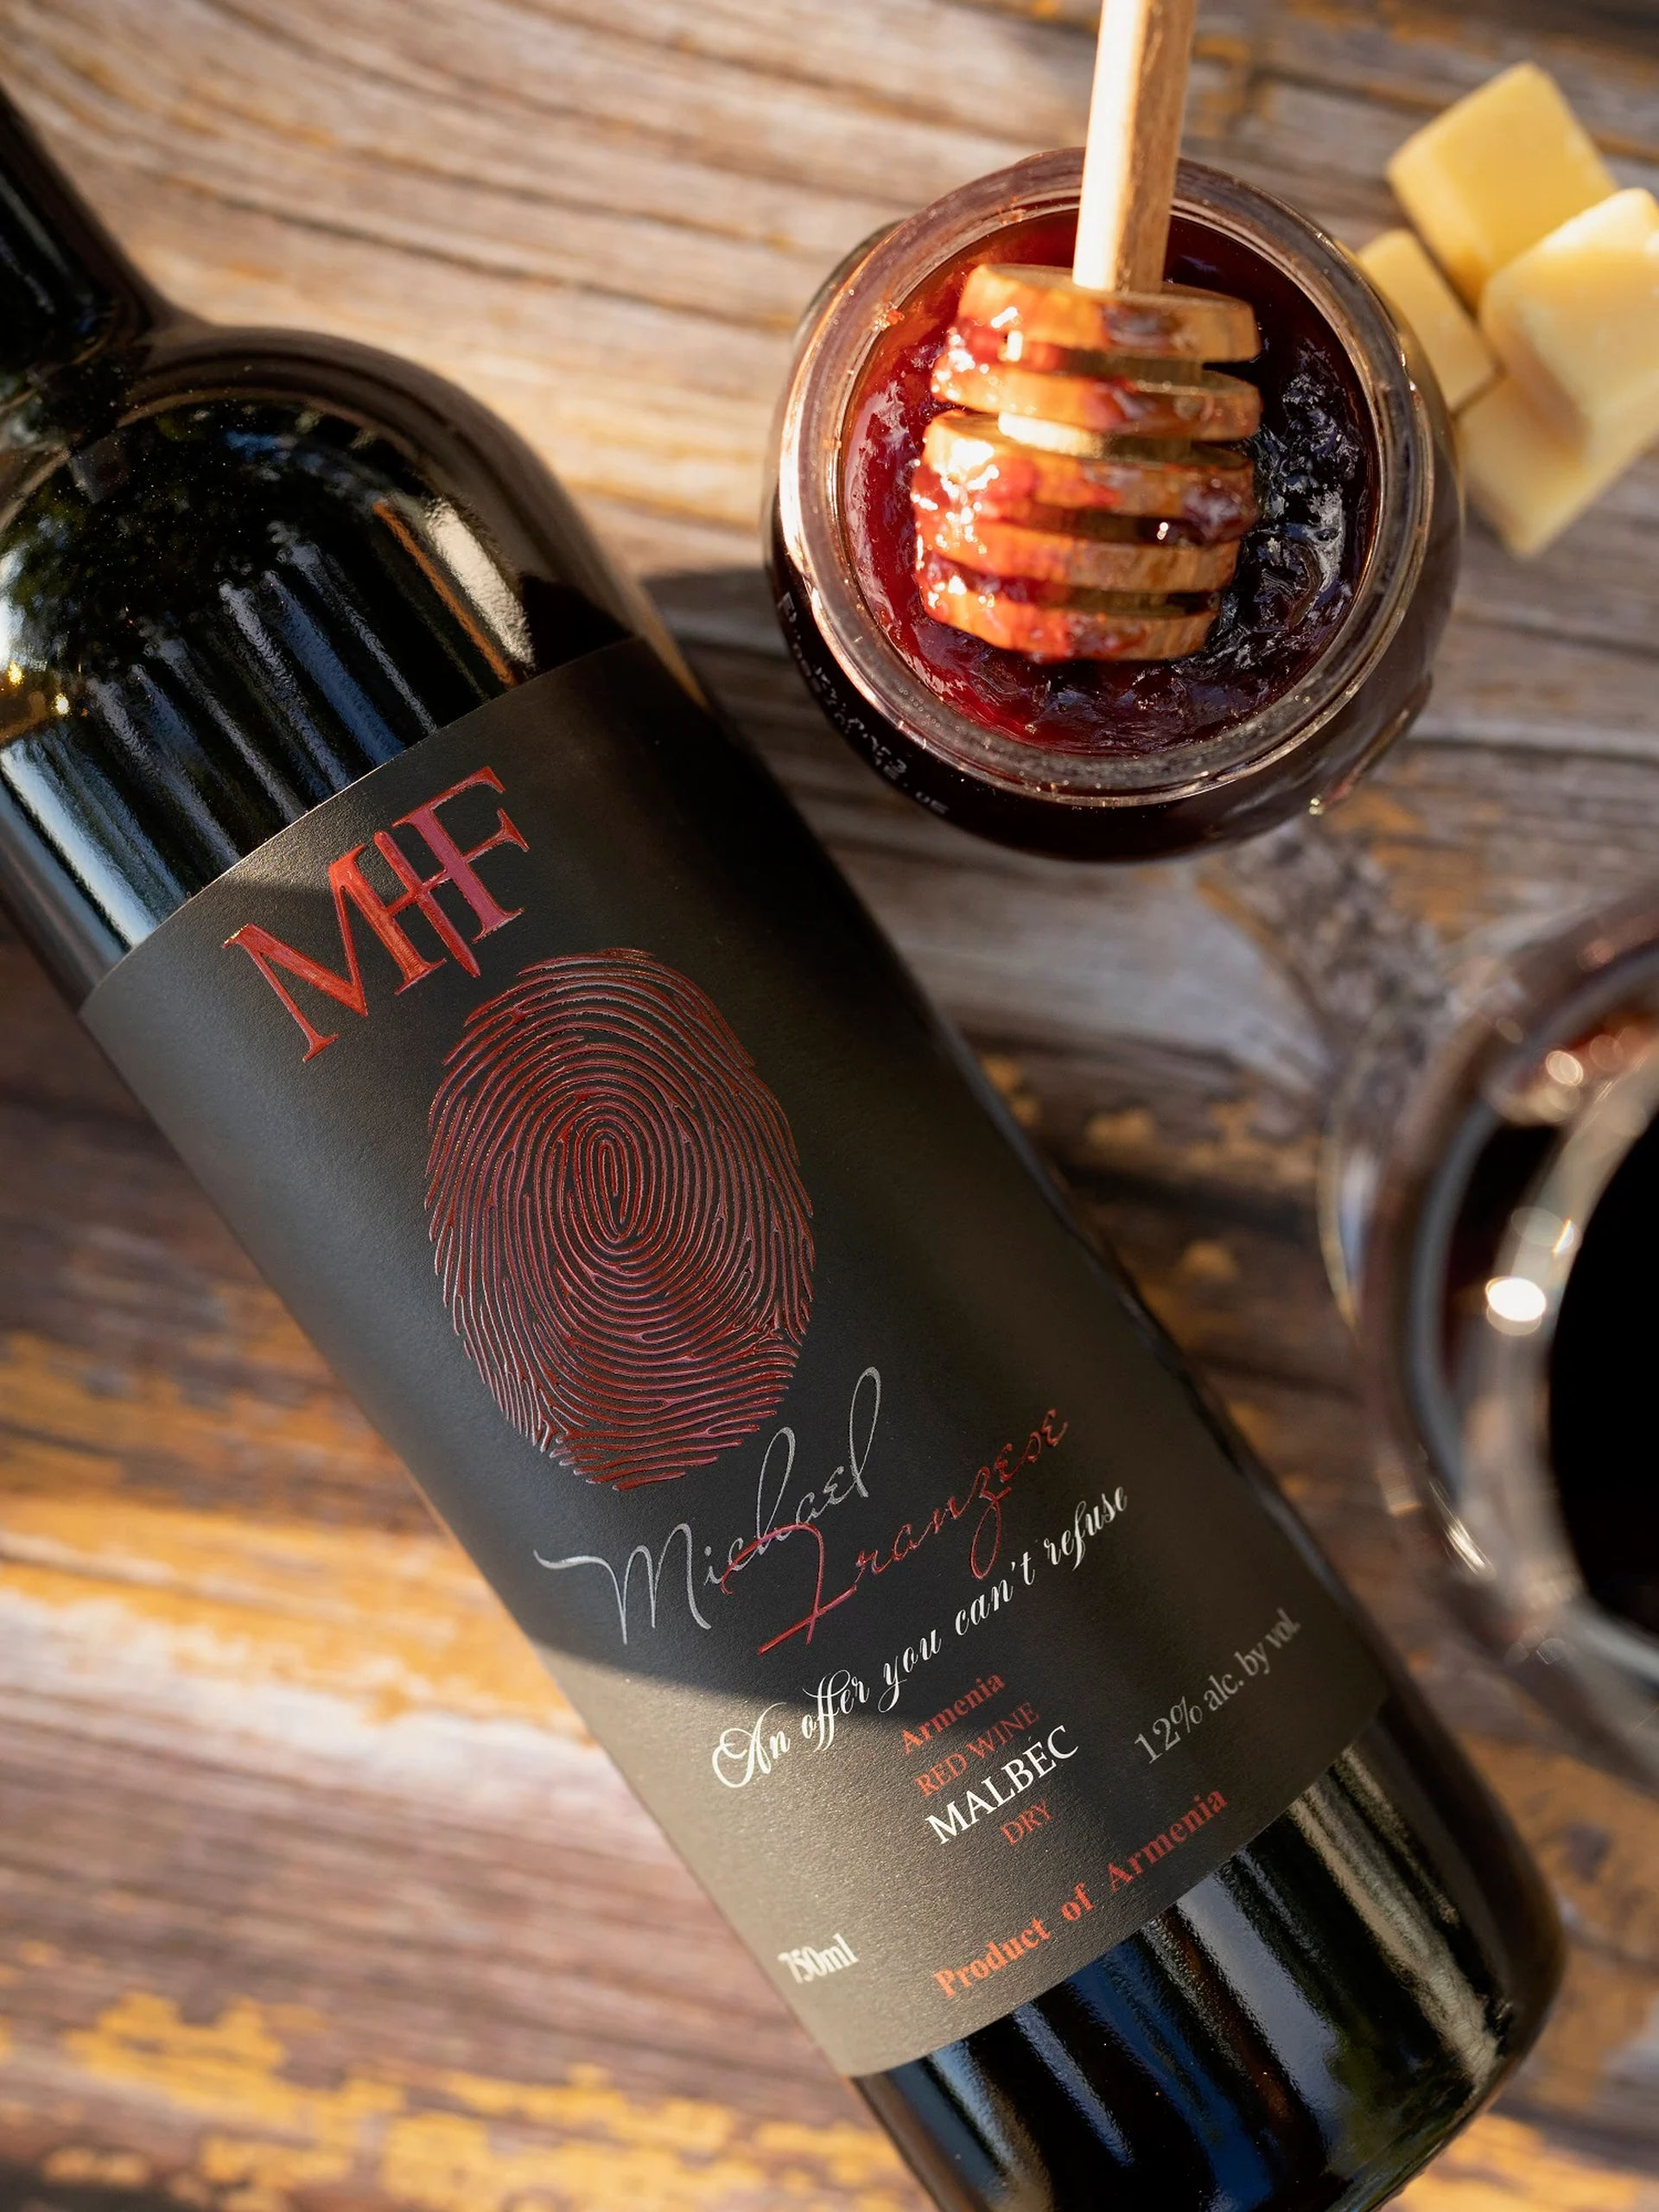 Malbec, a popular dry red wine style, offers wine enthusiasts a bold and robust option with its deep color, rich flavors of dark fruits, and firm tannins.